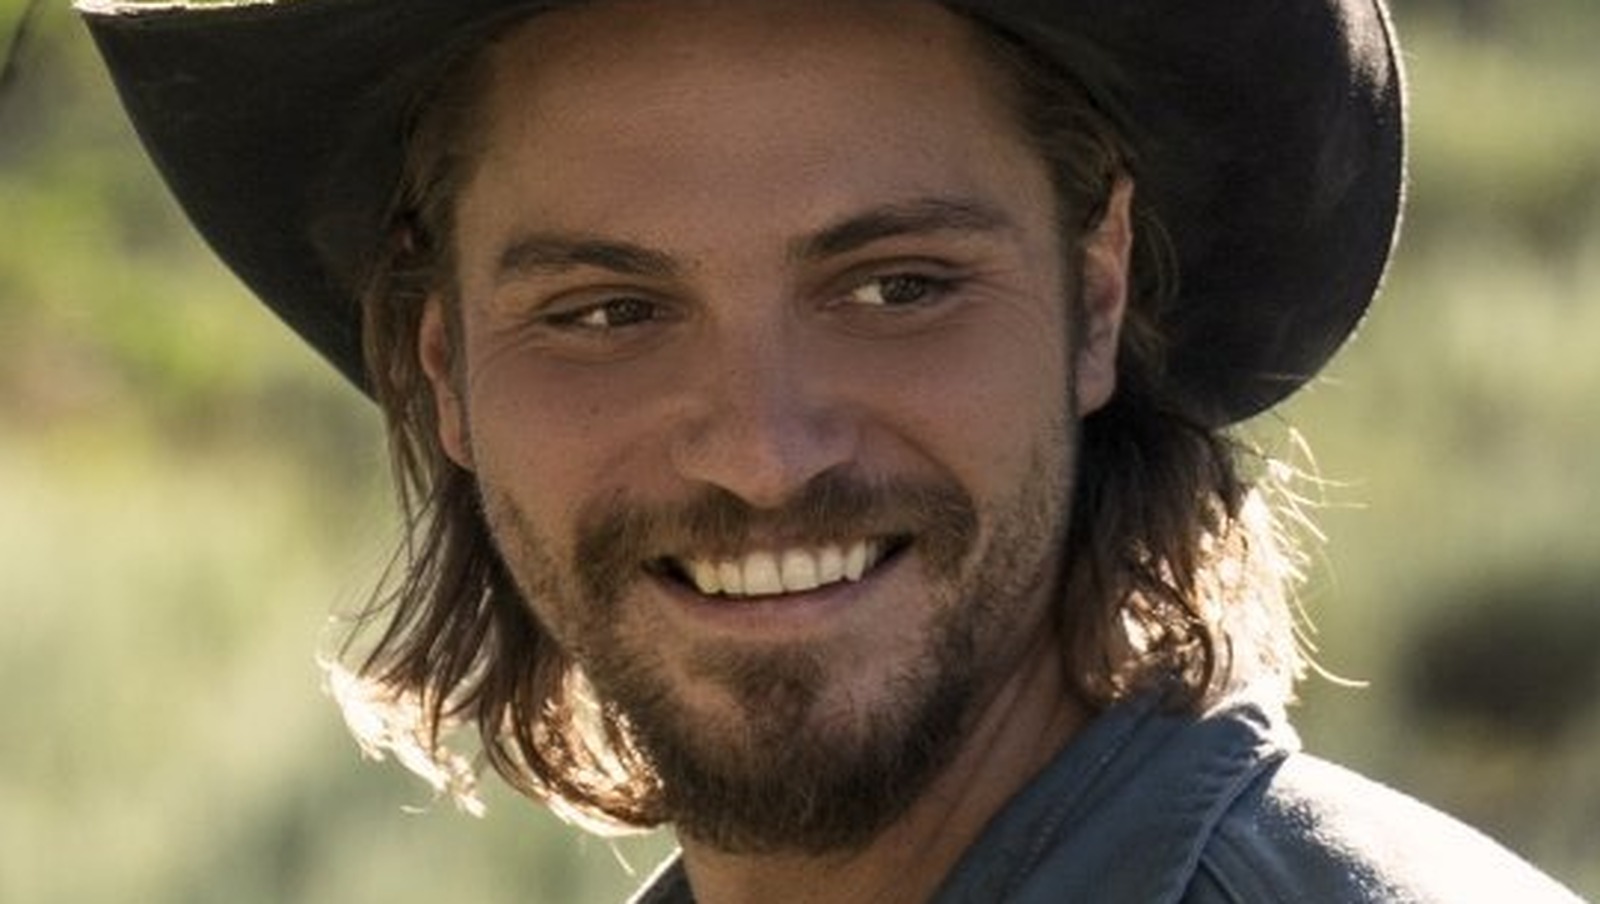 Luke Grimes And Wes Bentley Admit They Lied About Their Horse Riding Skills To Land Roles On Yellowstone – Looper